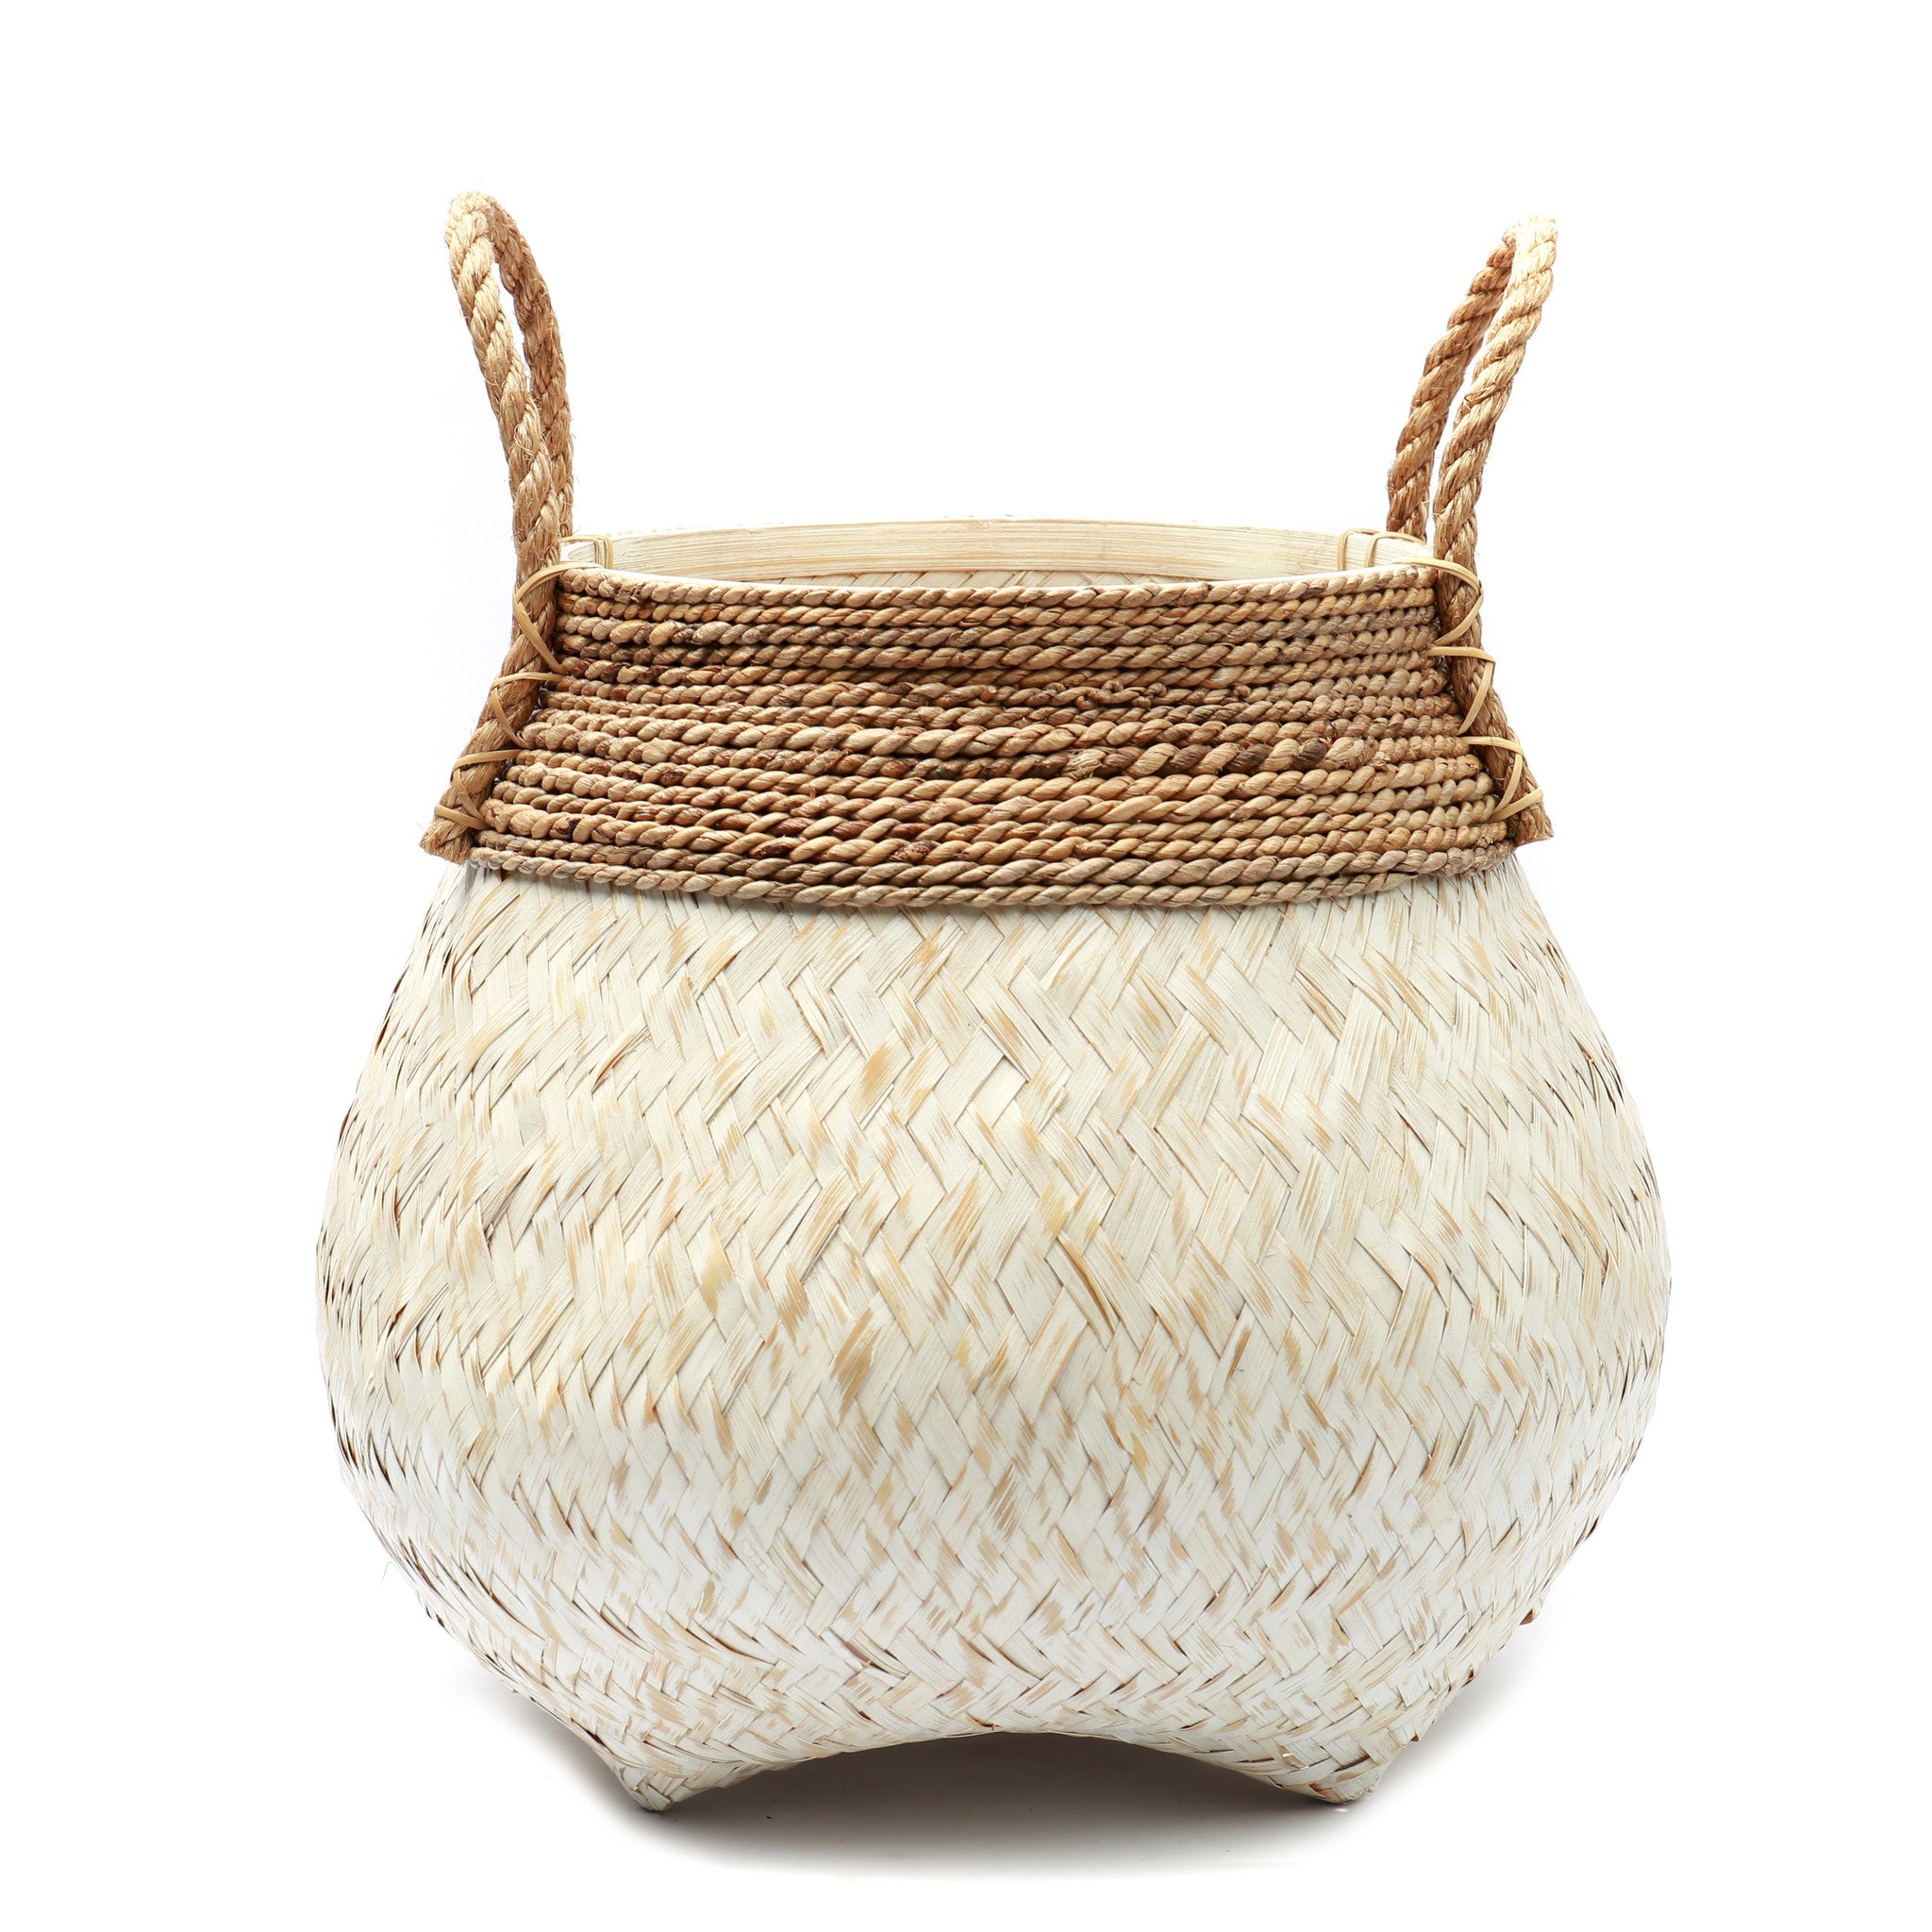 THE BELLY Basket white, front view